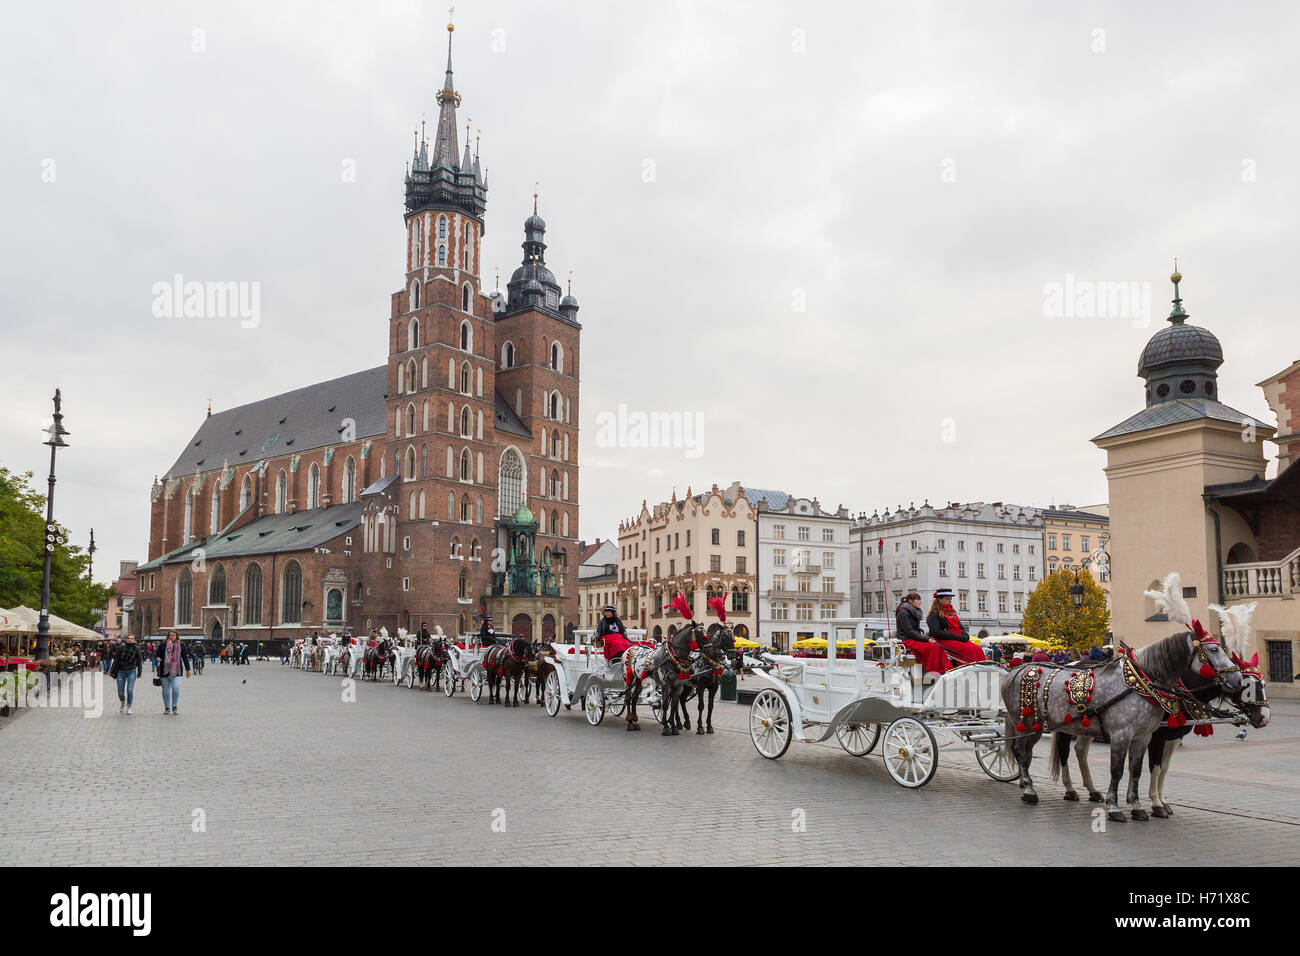 Krakow, Poland - October 27, 2016: Traditional horse carriages waiting in line for passengers on Krakow's main market square. Stock Photo